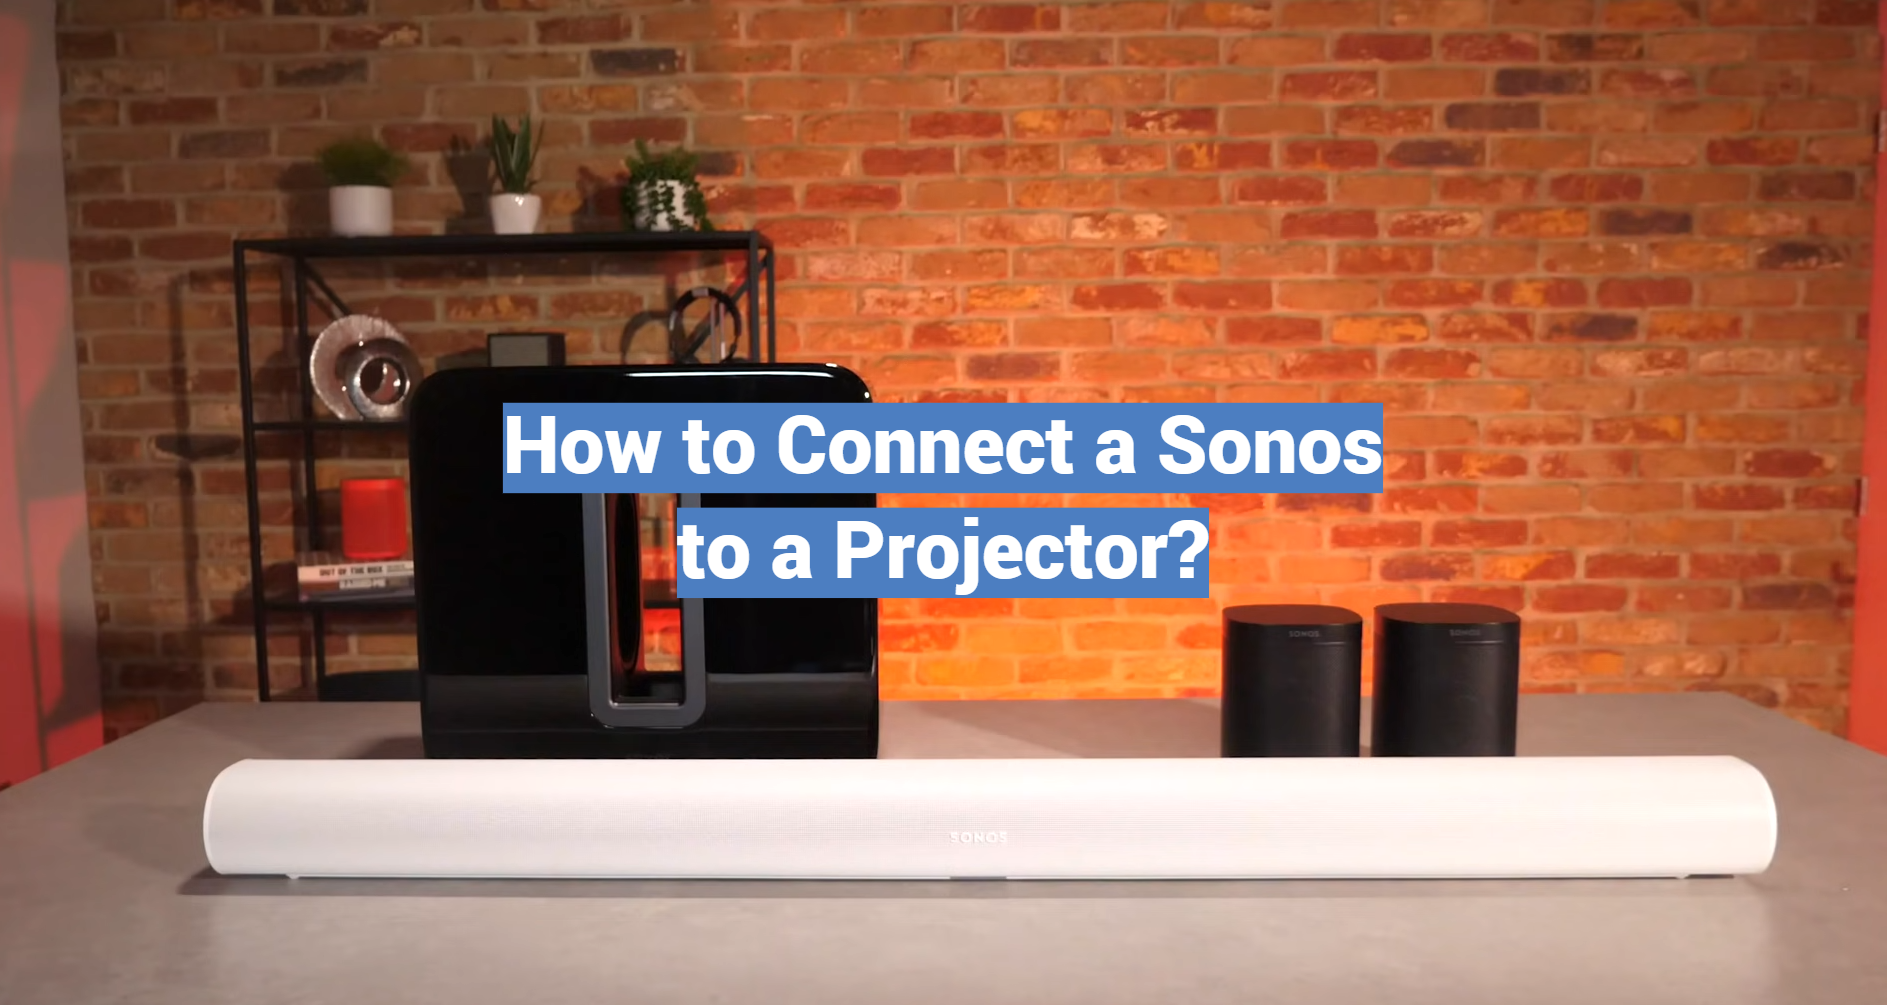 How to Connect a Sonos to a Projector?